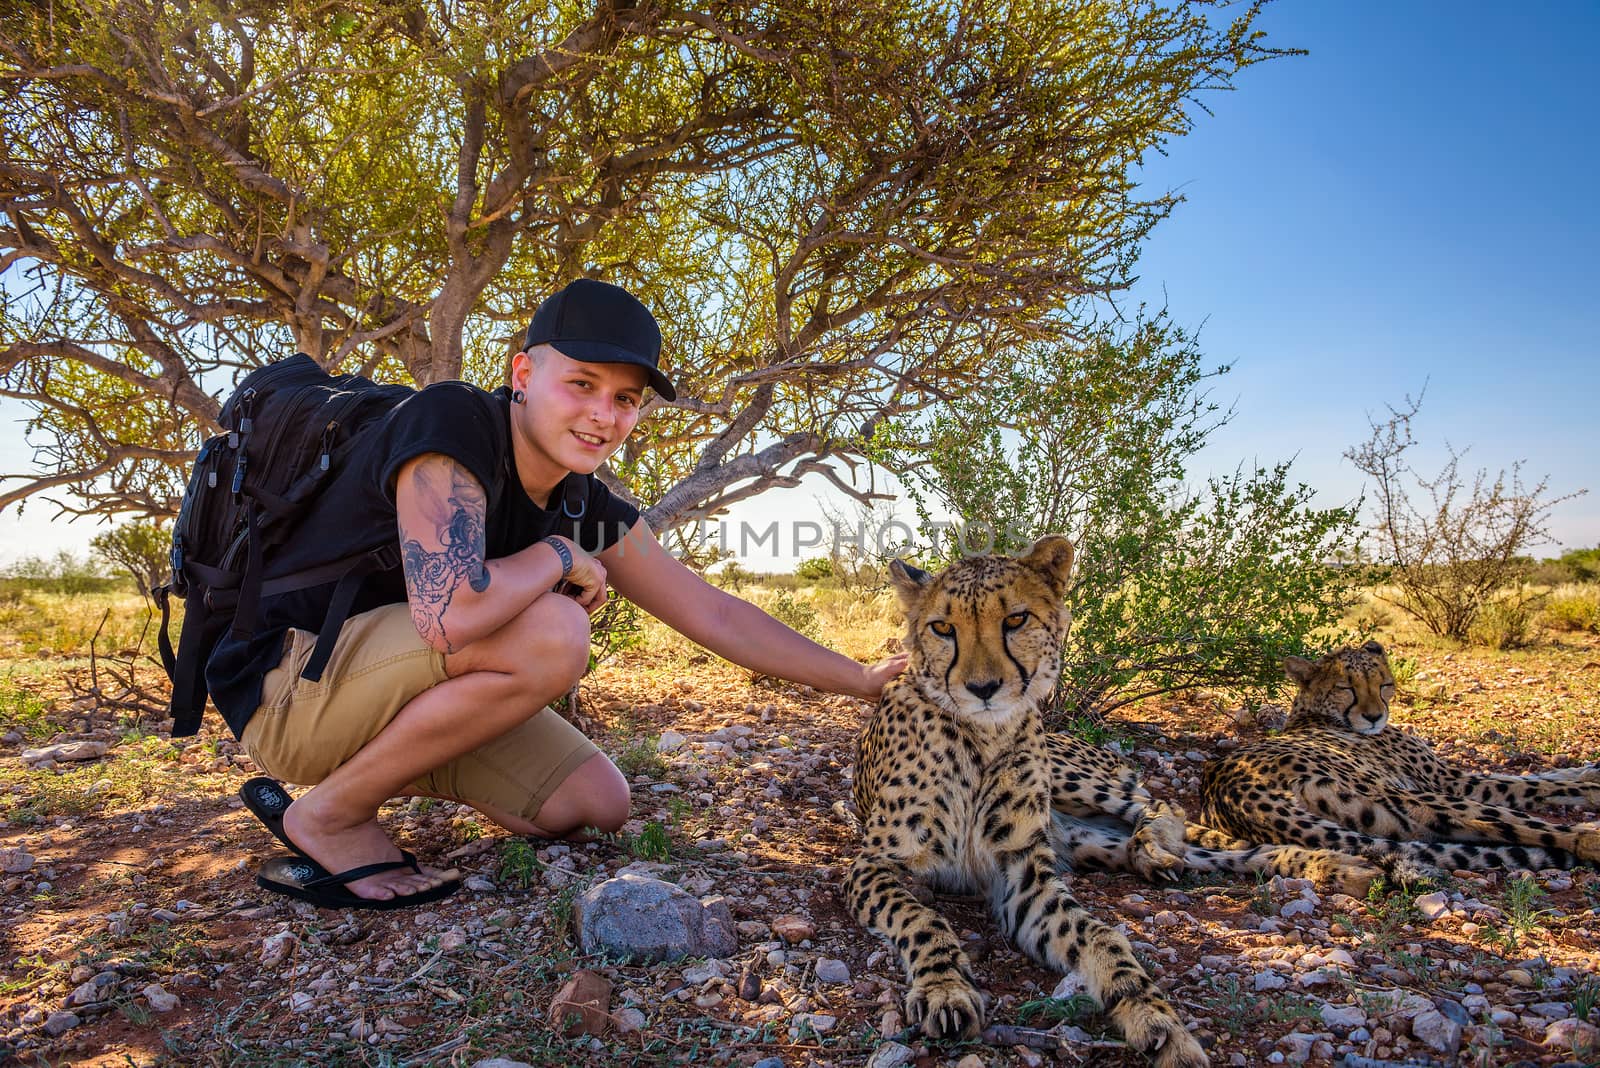 Mariental, Namibia - March 25, 2019 - Tourist plays with two cheetahs